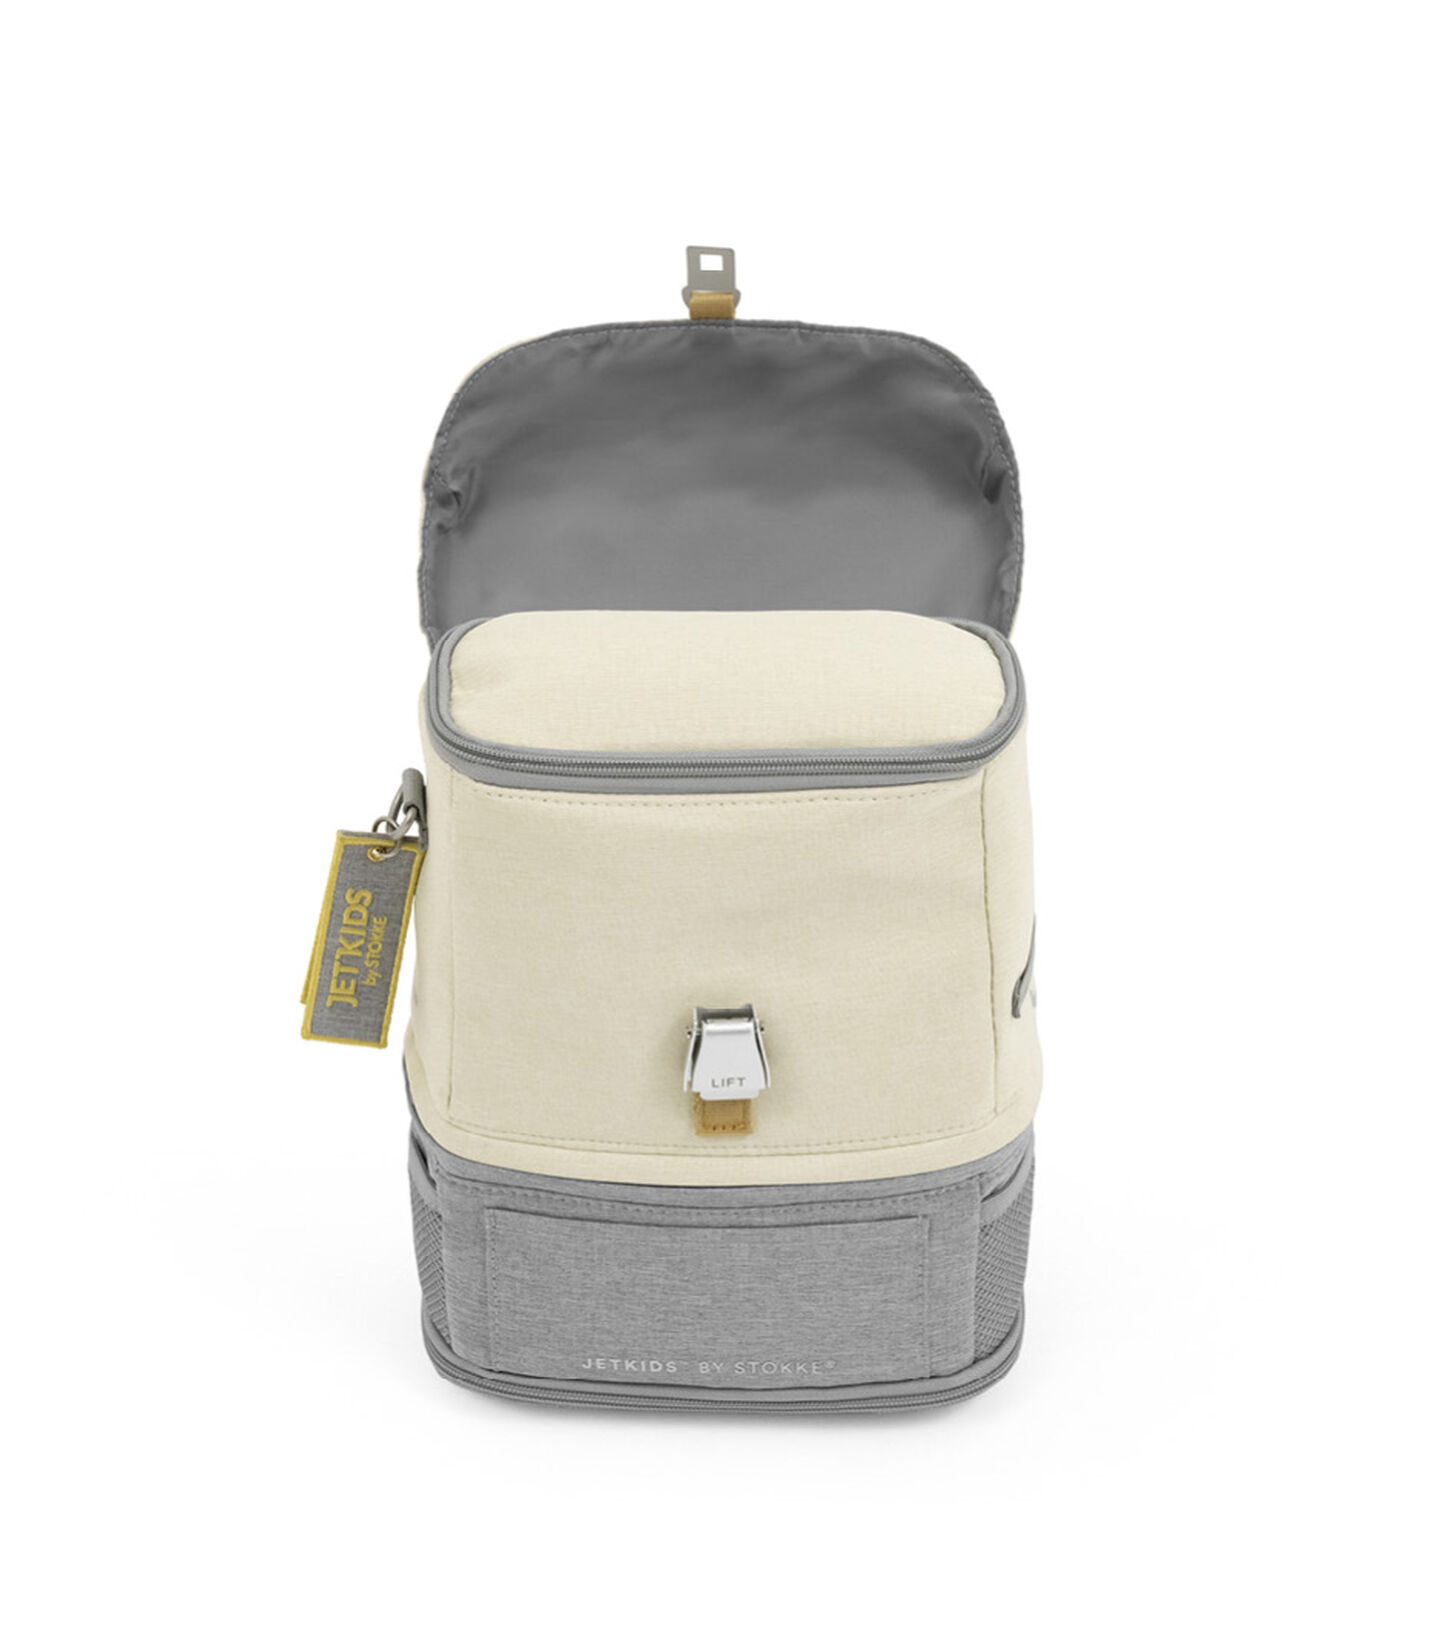 JetKids by Stokke® Crew Backpack White, White, mainview view 10